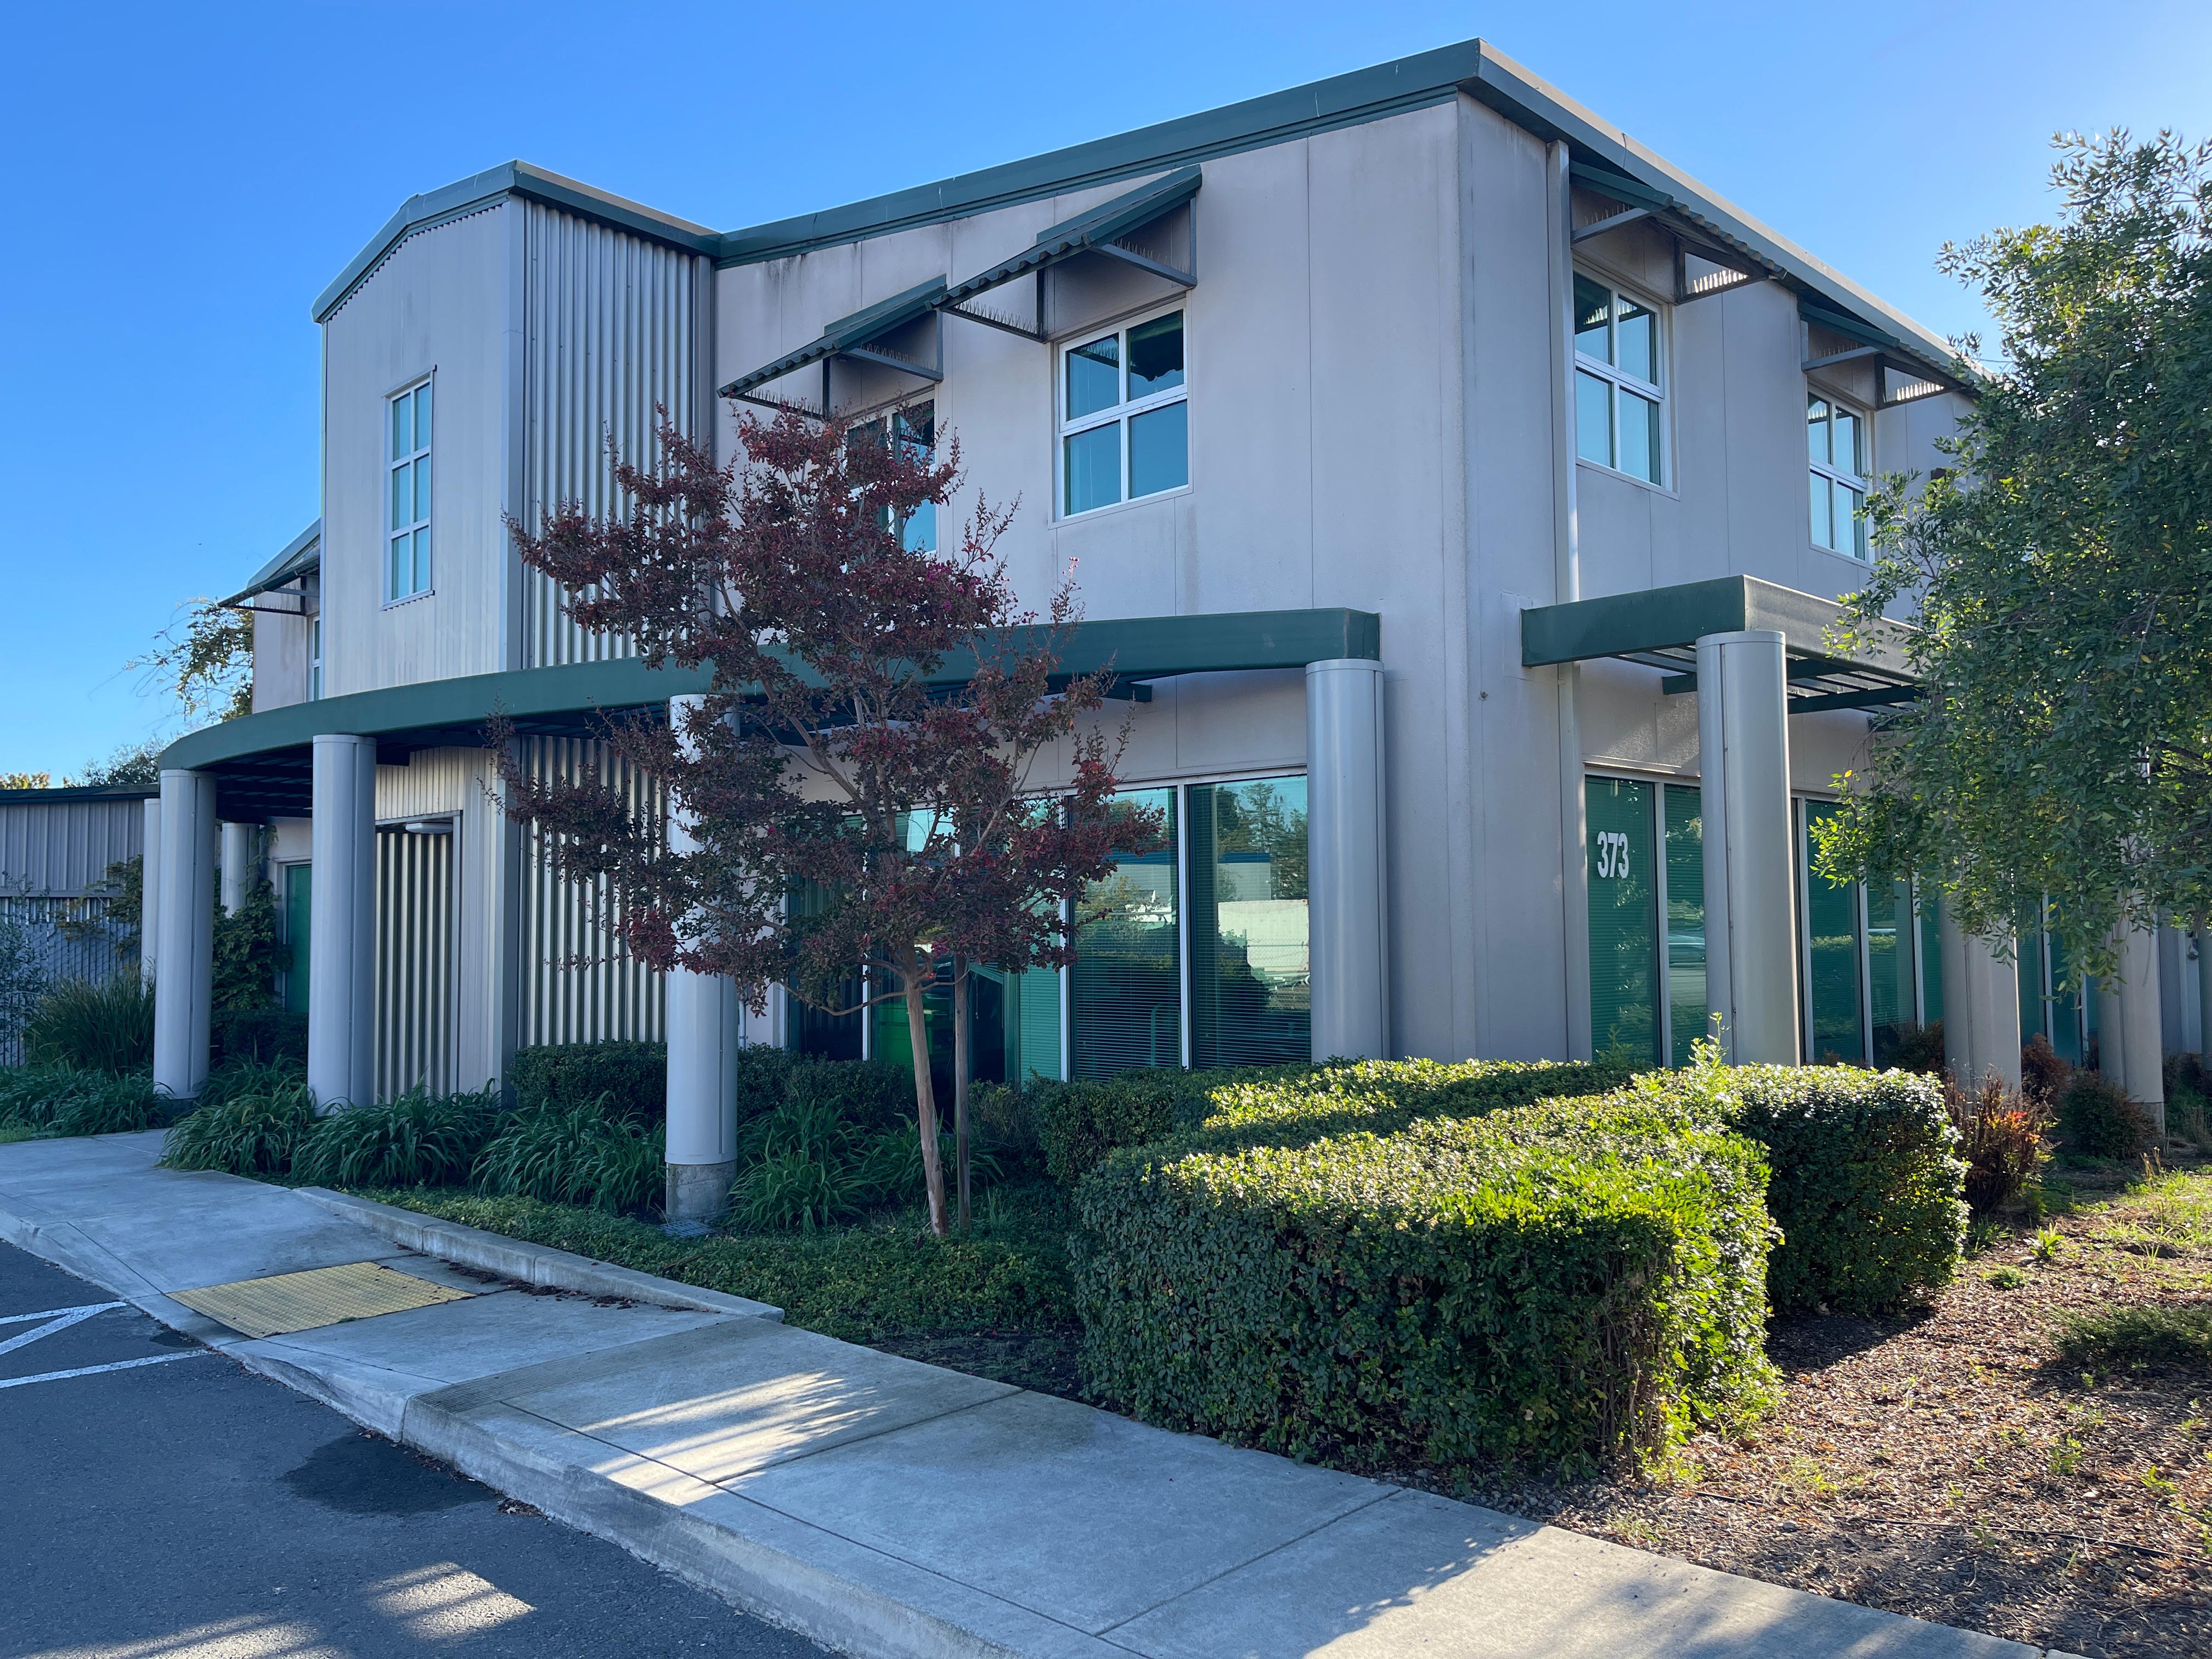 SERVPRO of Lafayette, Moraga, and Orinda is located at 373 Blodgett St in Cotati, California, residing in an industrial neighborhood. To the right of the office building features a placard with SERVPRO of Lafayette/Moraga/Orinda - Damage Restoration Service - Cotati